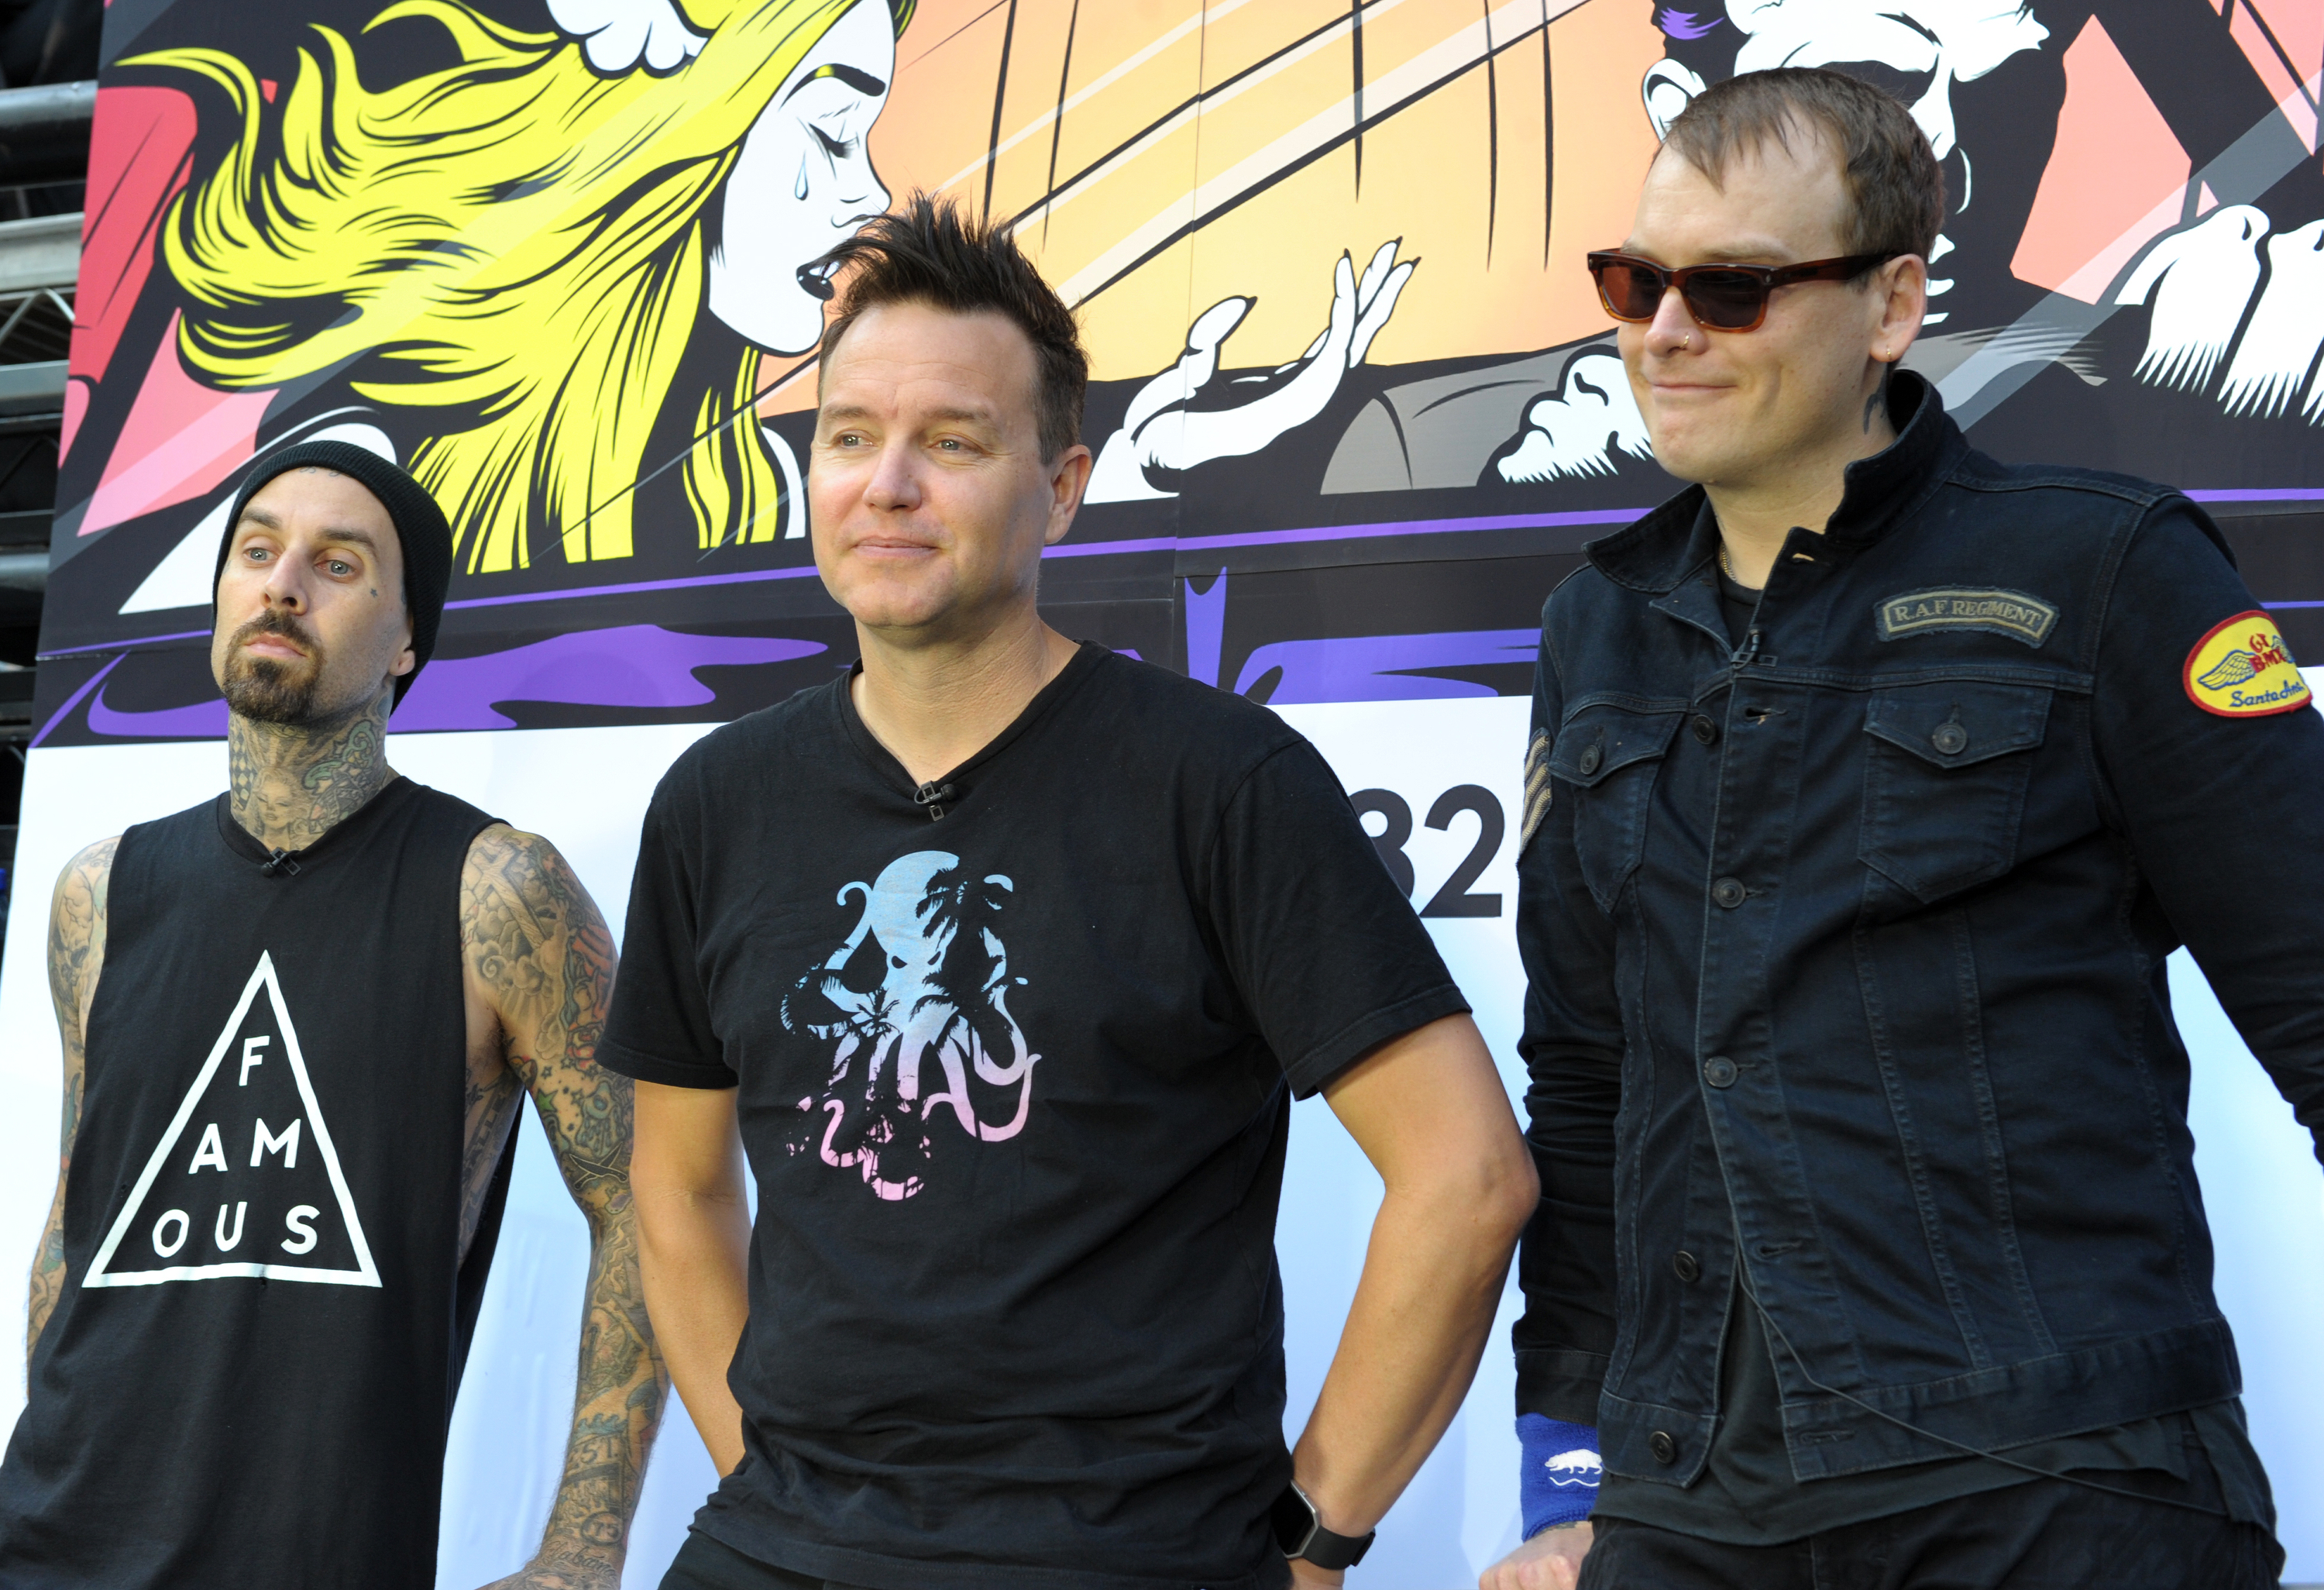 Blink 182 performs live from Central Park in New York City as part of the Summer Concert Series (Paula Lobo-ABC via Getty Images)